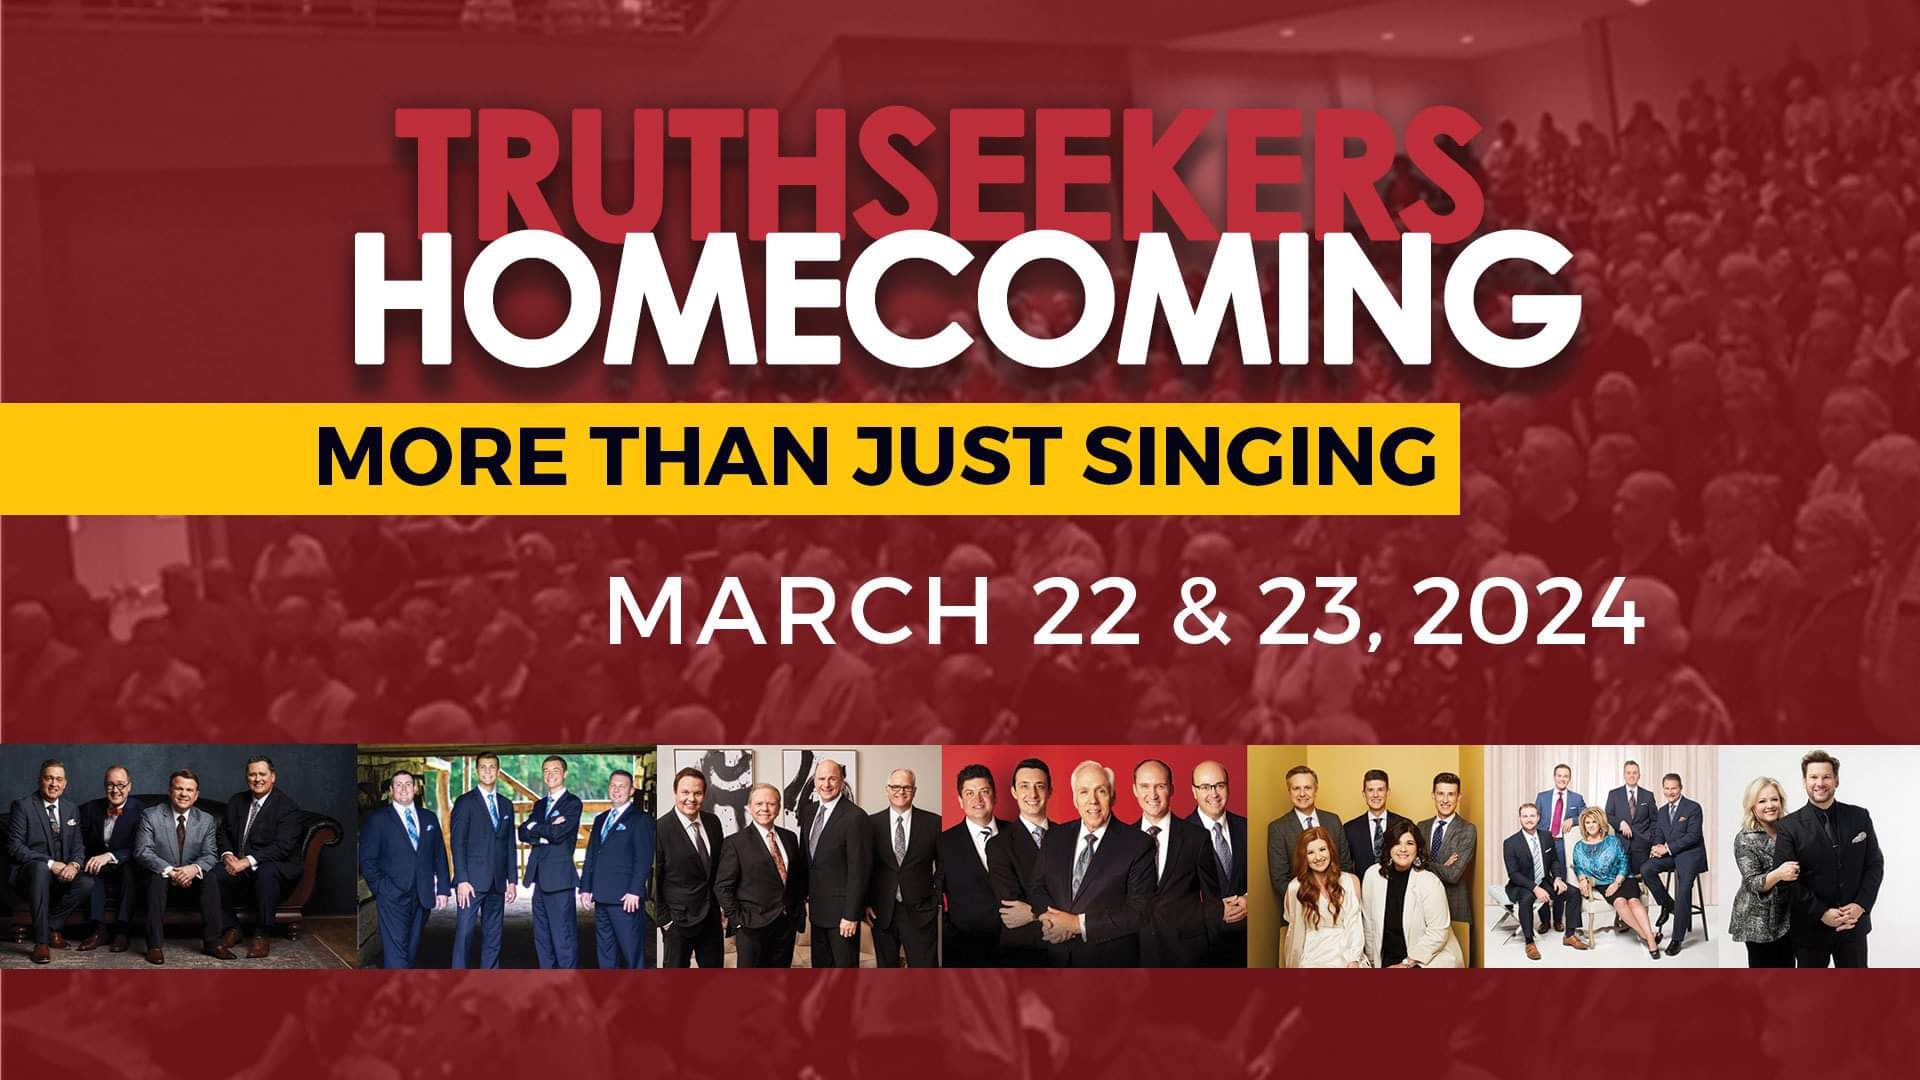 truthseekers-homecoming-marion-illinois